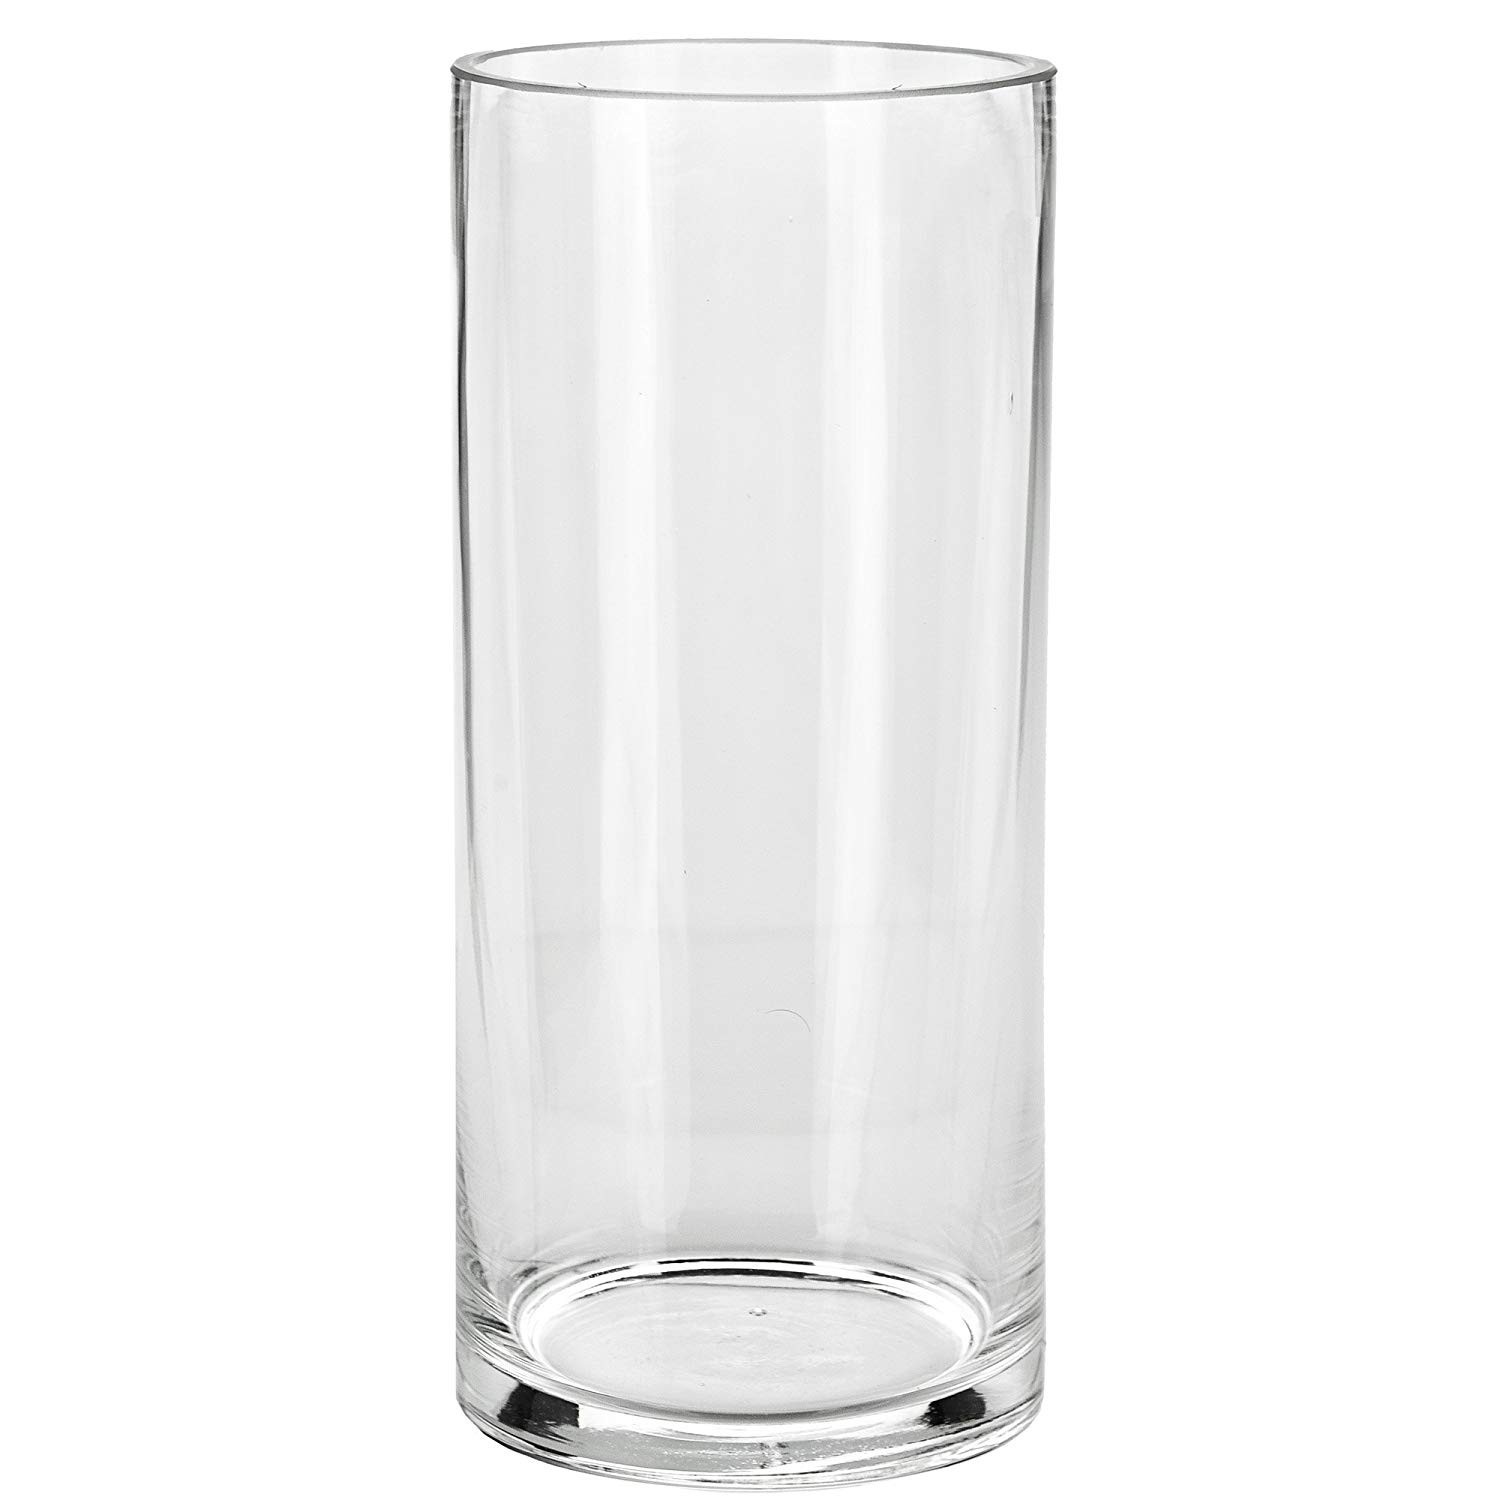 14 Wonderful 6 Inch Cylinder Vase 2024 free download 6 inch cylinder vase of amazon com couronne company 7250 large cylinder glass vase 67 6 oz intended for amazon com couronne company 7250 large cylinder glass vase 67 6 oz capacity home kitch